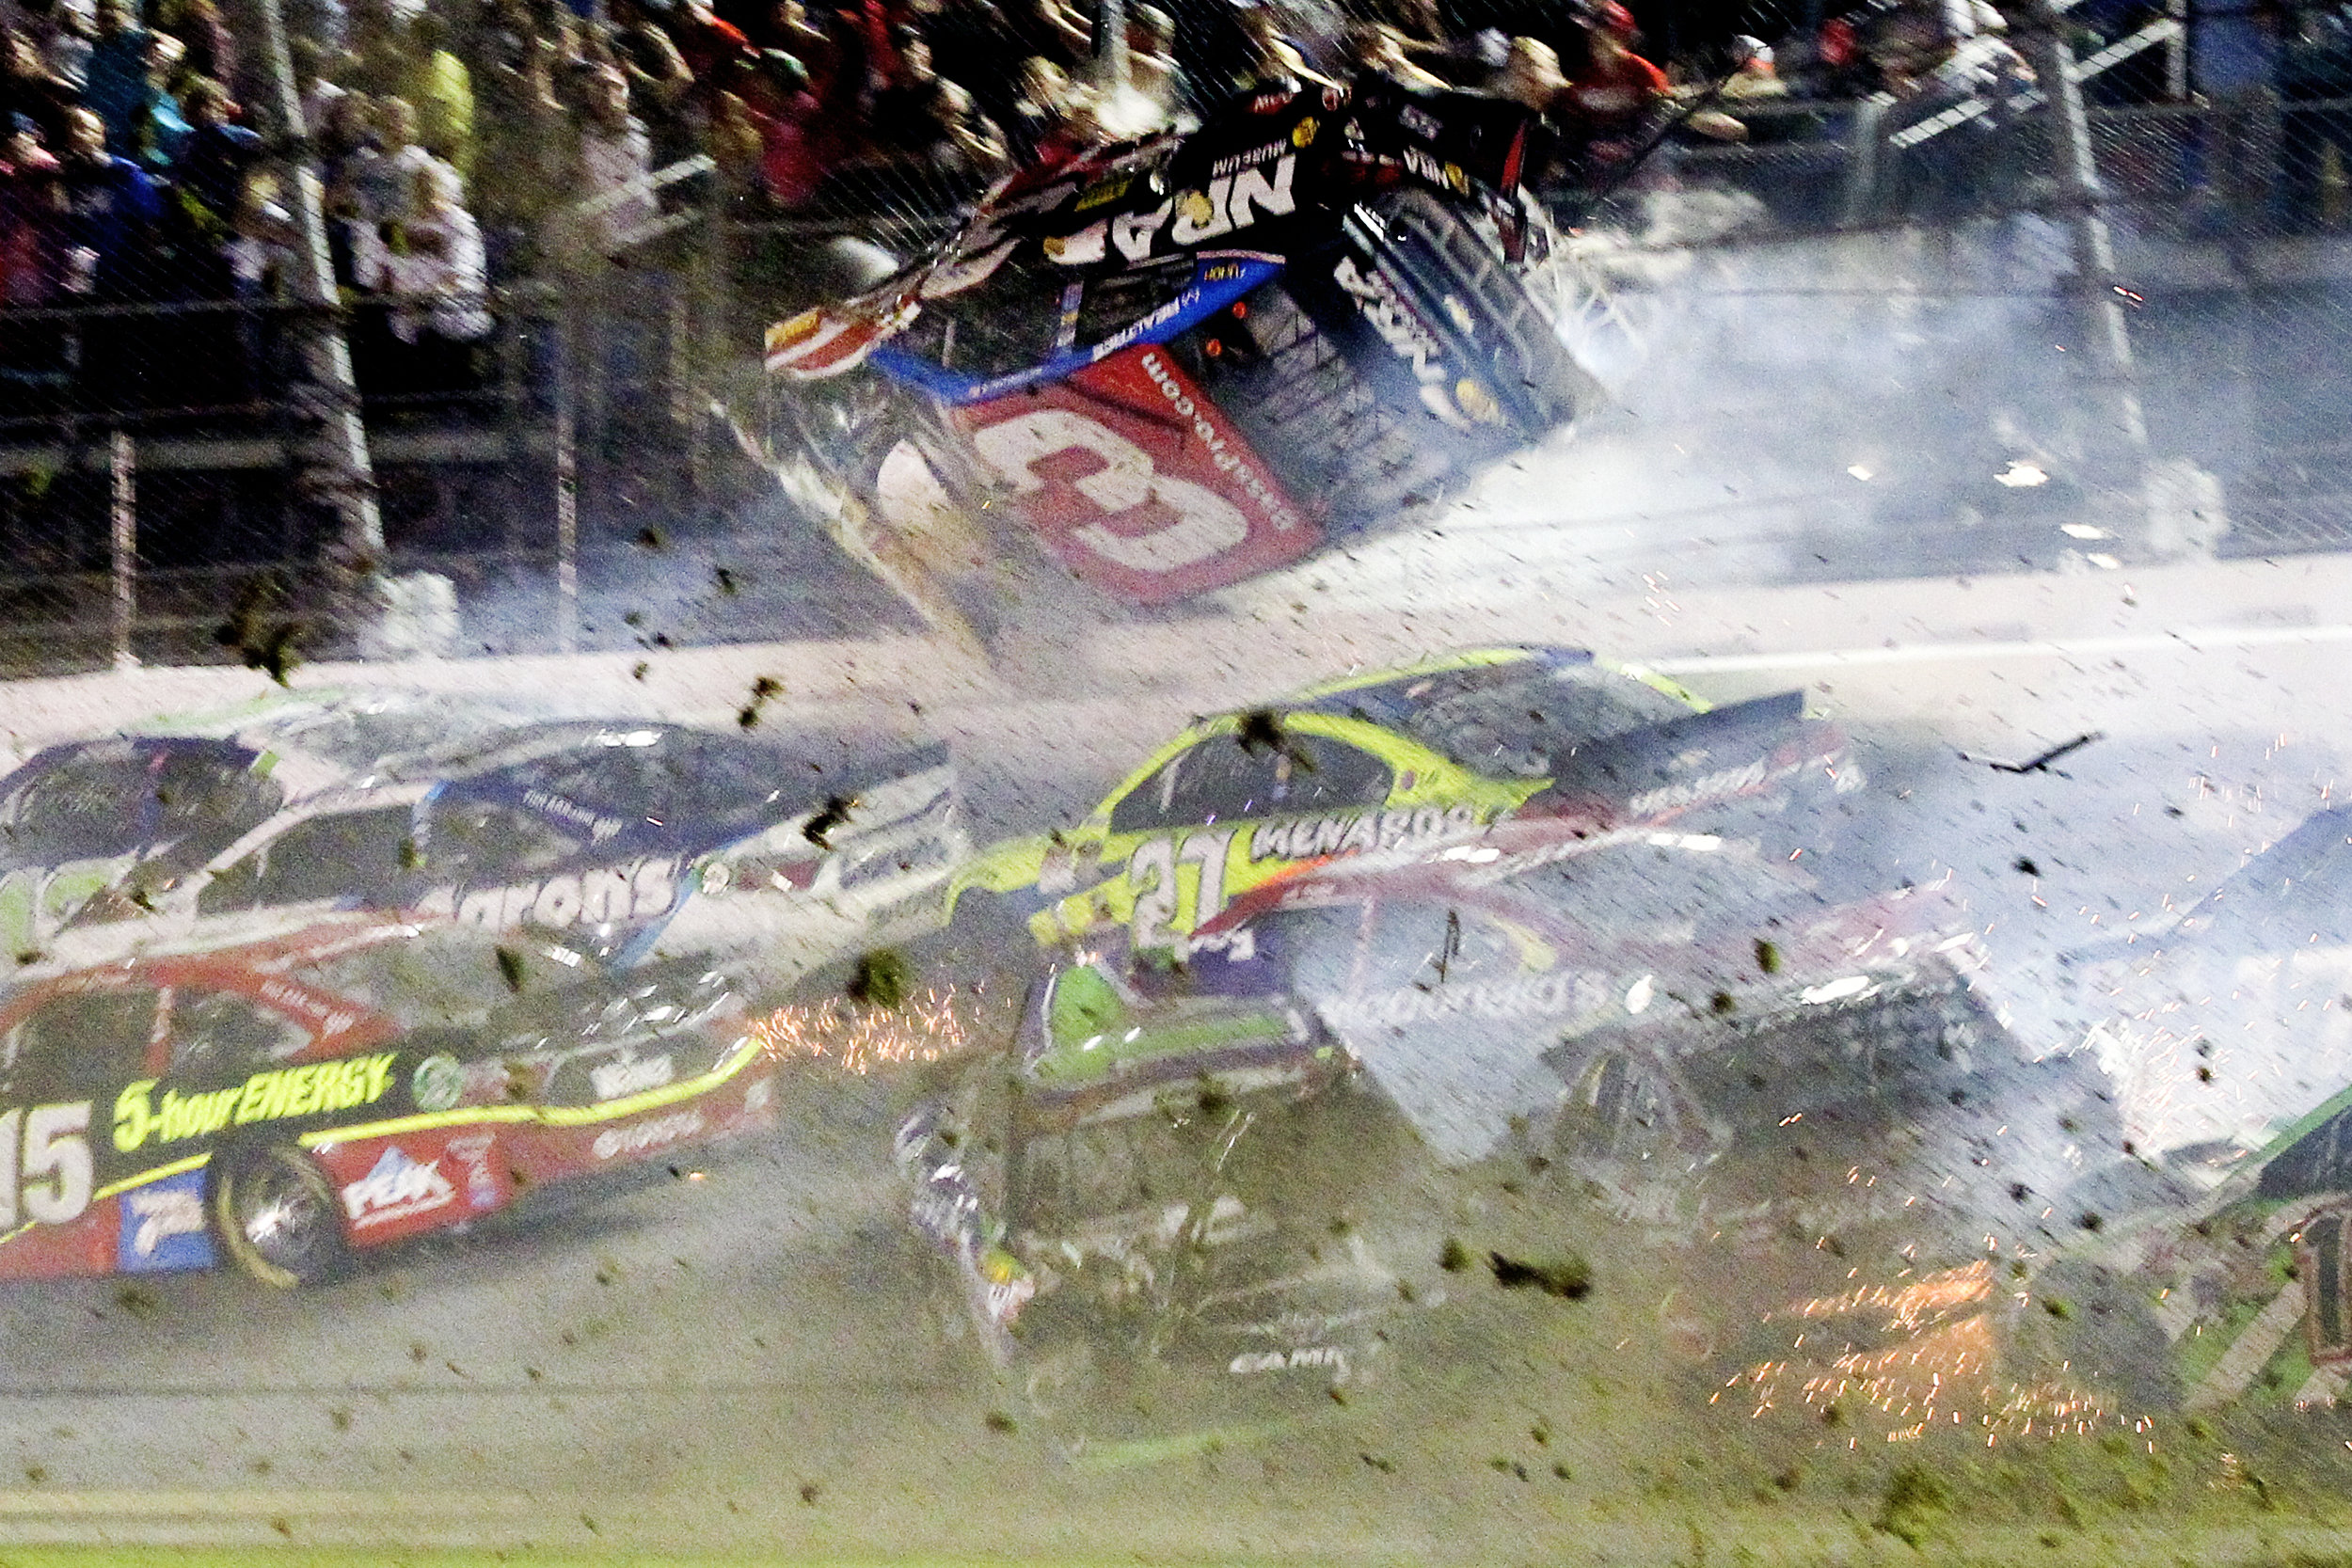  Austin Dillon (3) goes airborne upside down in a crash on turn one after the final lap during the Coke Zero 400 NASCAR Sprint Cup race at Daytona International Speedway in Daytona Beach, Florida. 